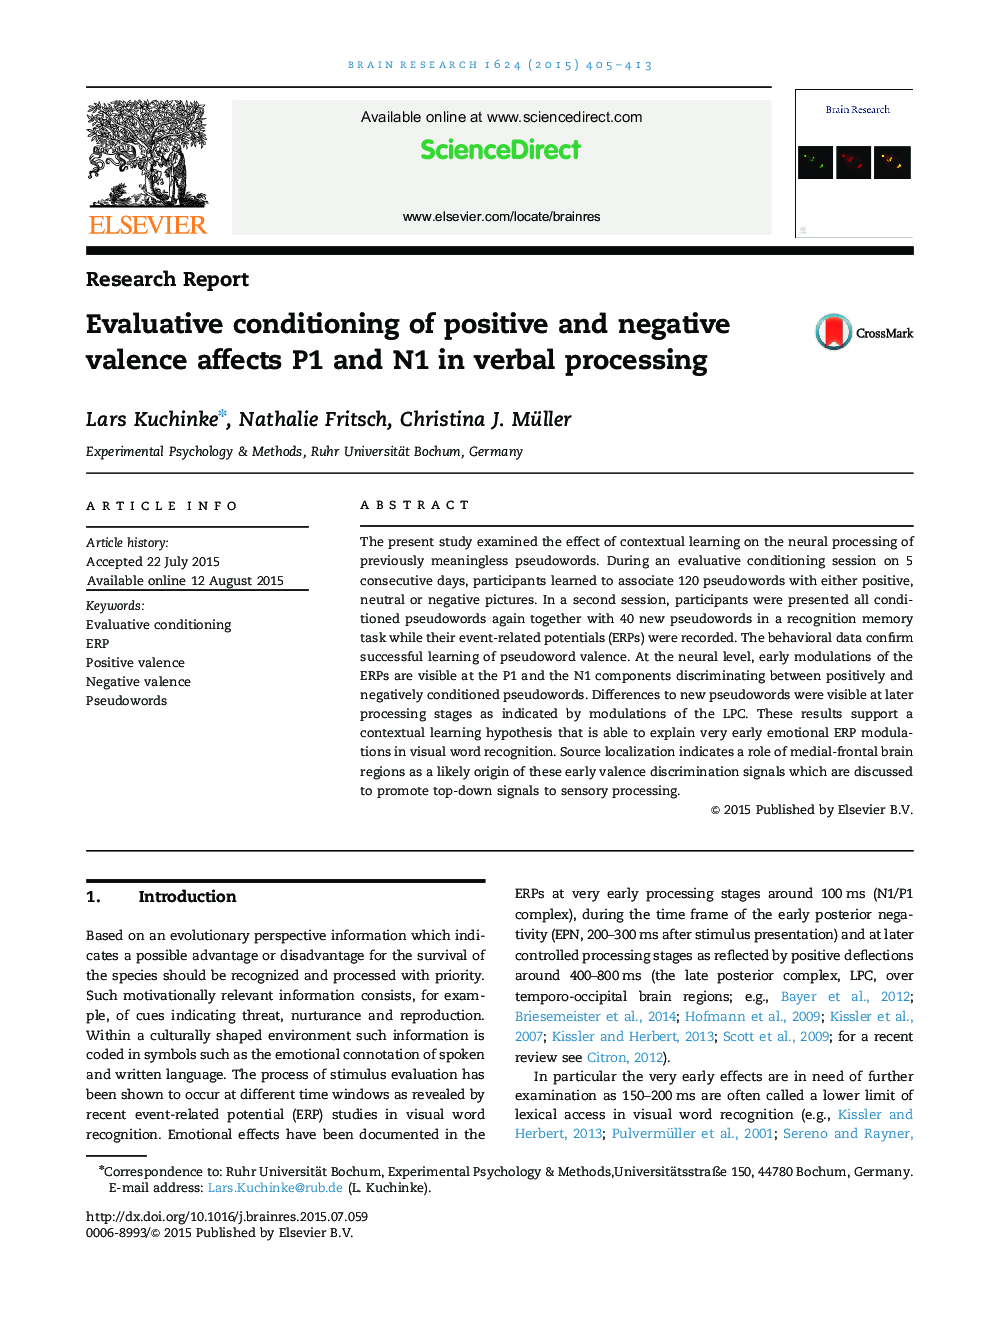 Research ReportEvaluative conditioning of positive and negative valence affects P1 and N1 in verbal processing